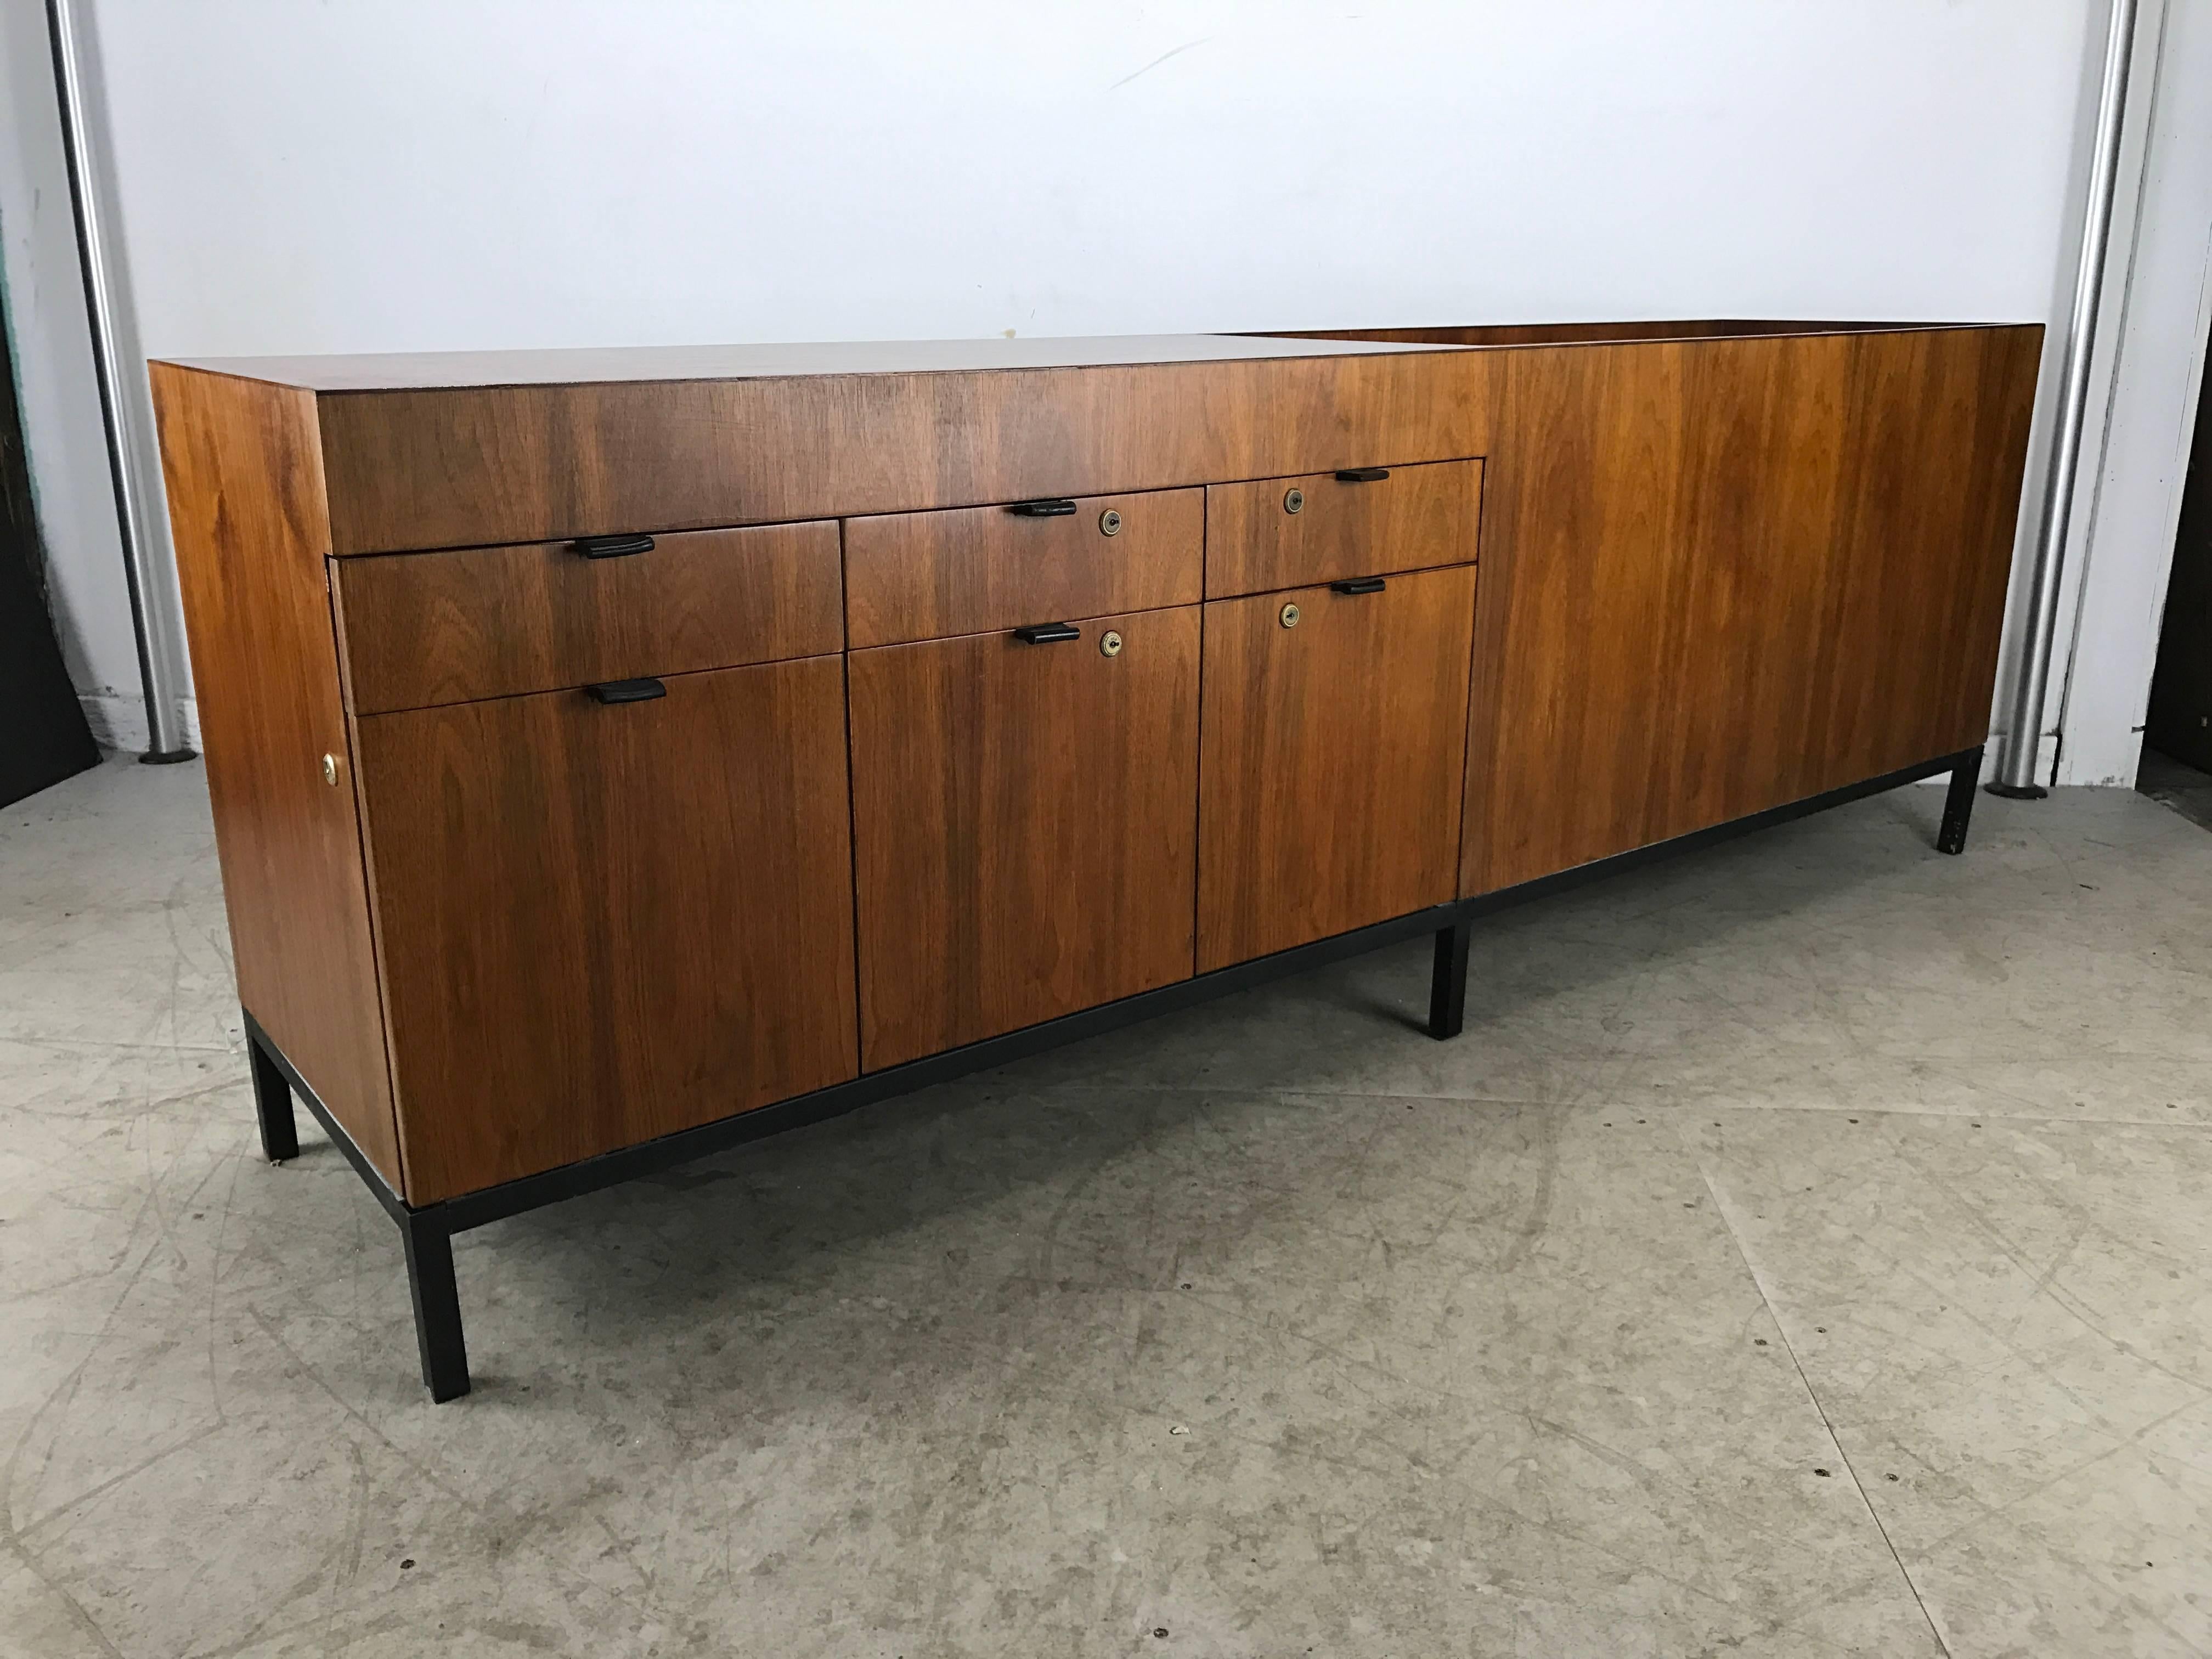 20th Century Unusual Modern Bookmatched Walnut Credenza, Leather Pulls by Stow and Davis